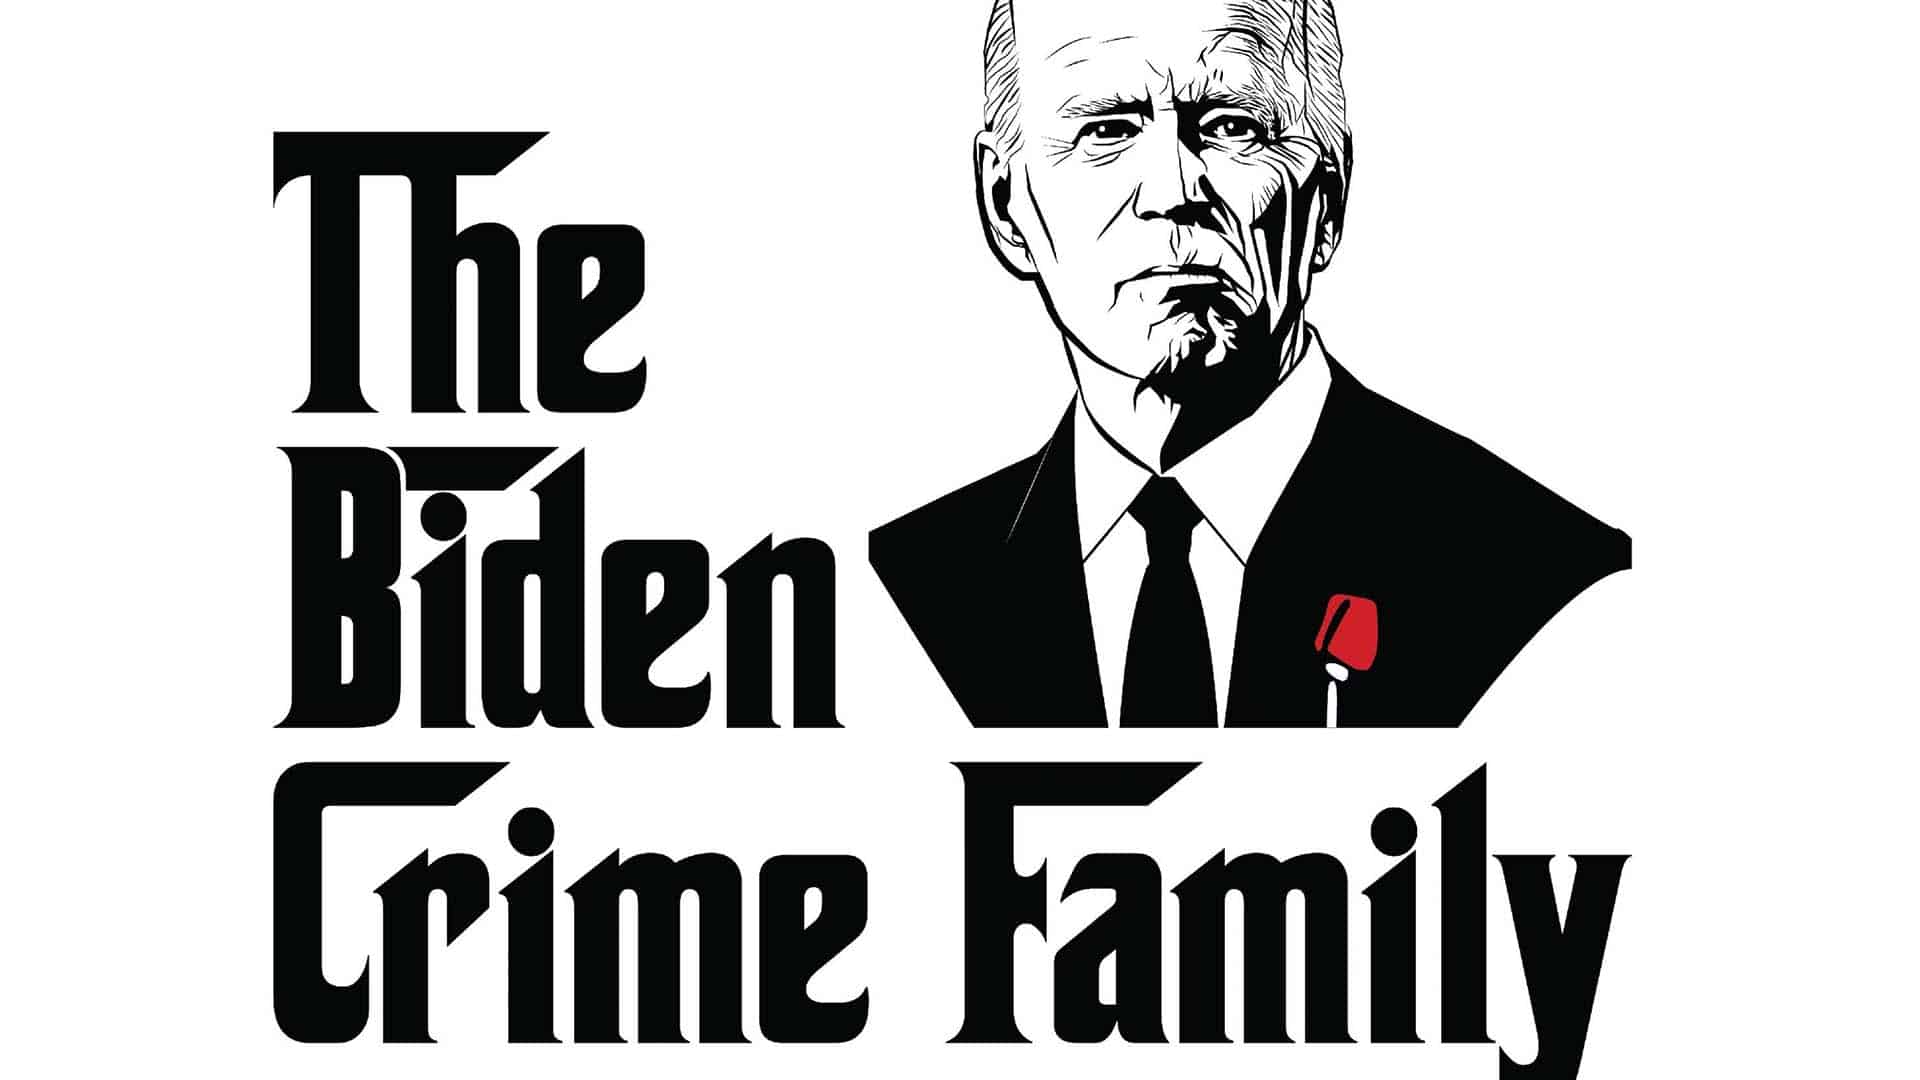 Mike Church Show-Will Anyone In The Biden Crime Family Pay For What Congress Has Revealed?